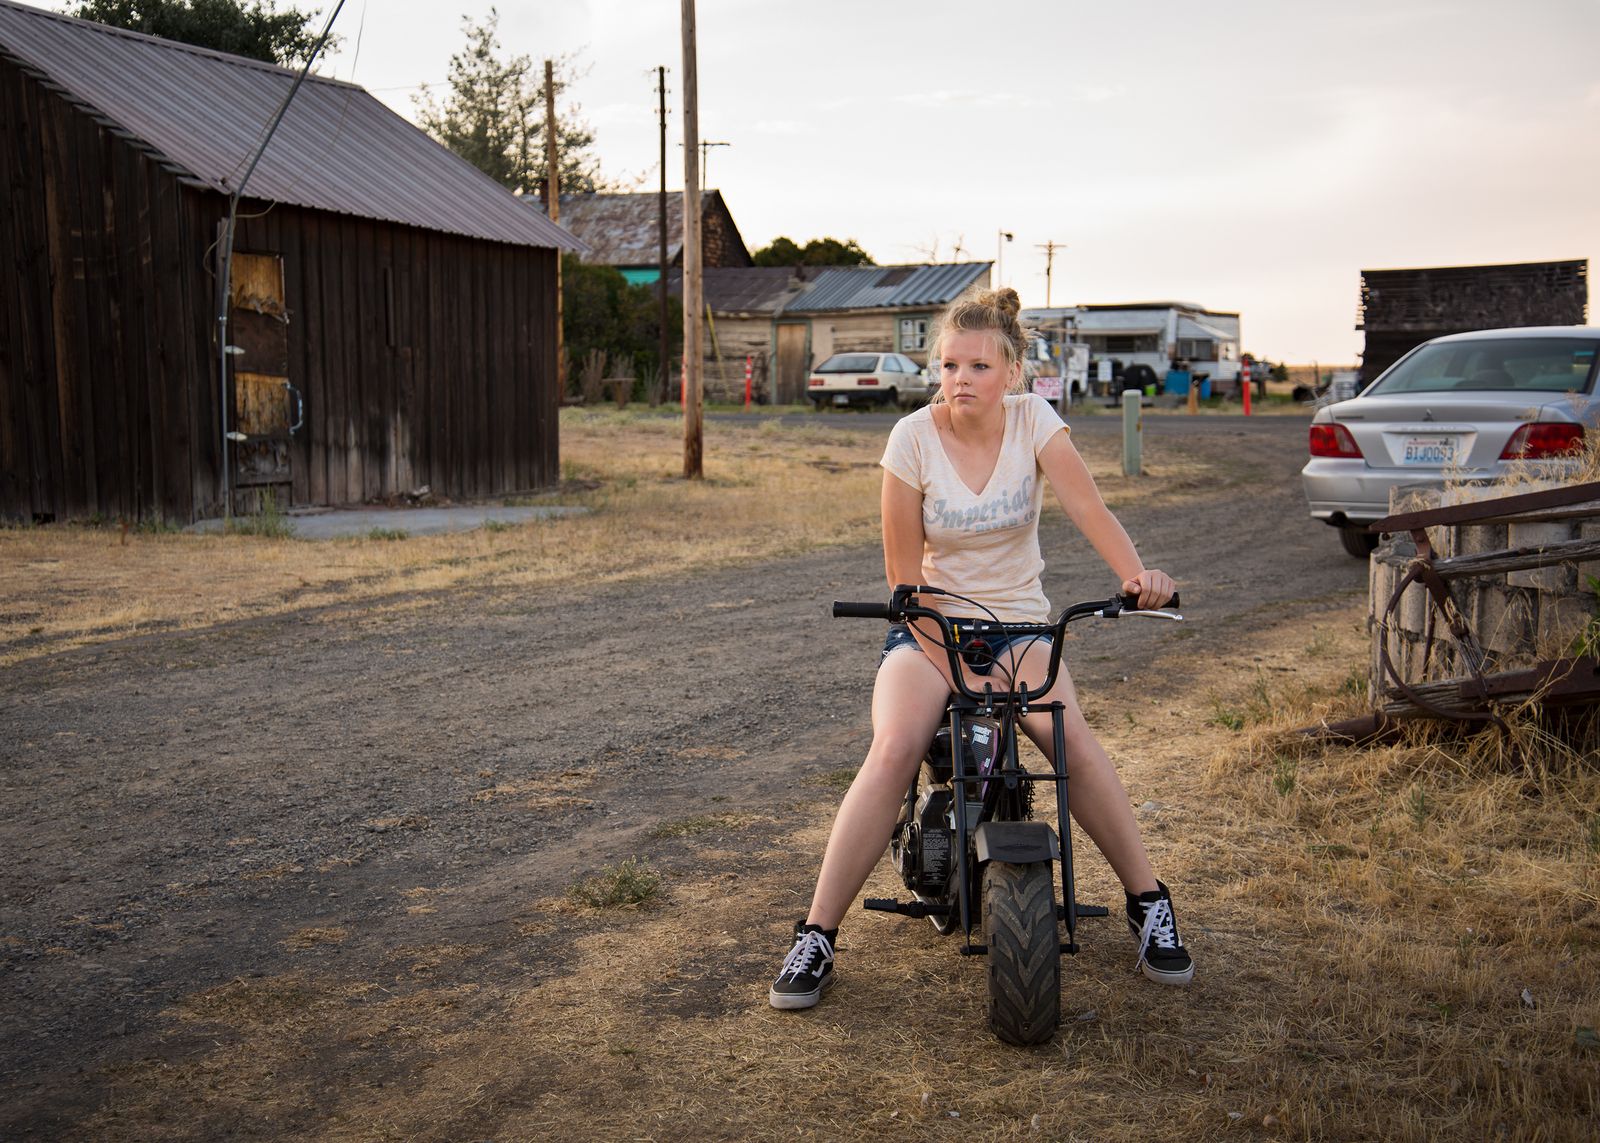 © Rosie Day - A teenage girl rides a minibike through the streets of Shaniko (Pop. 28)